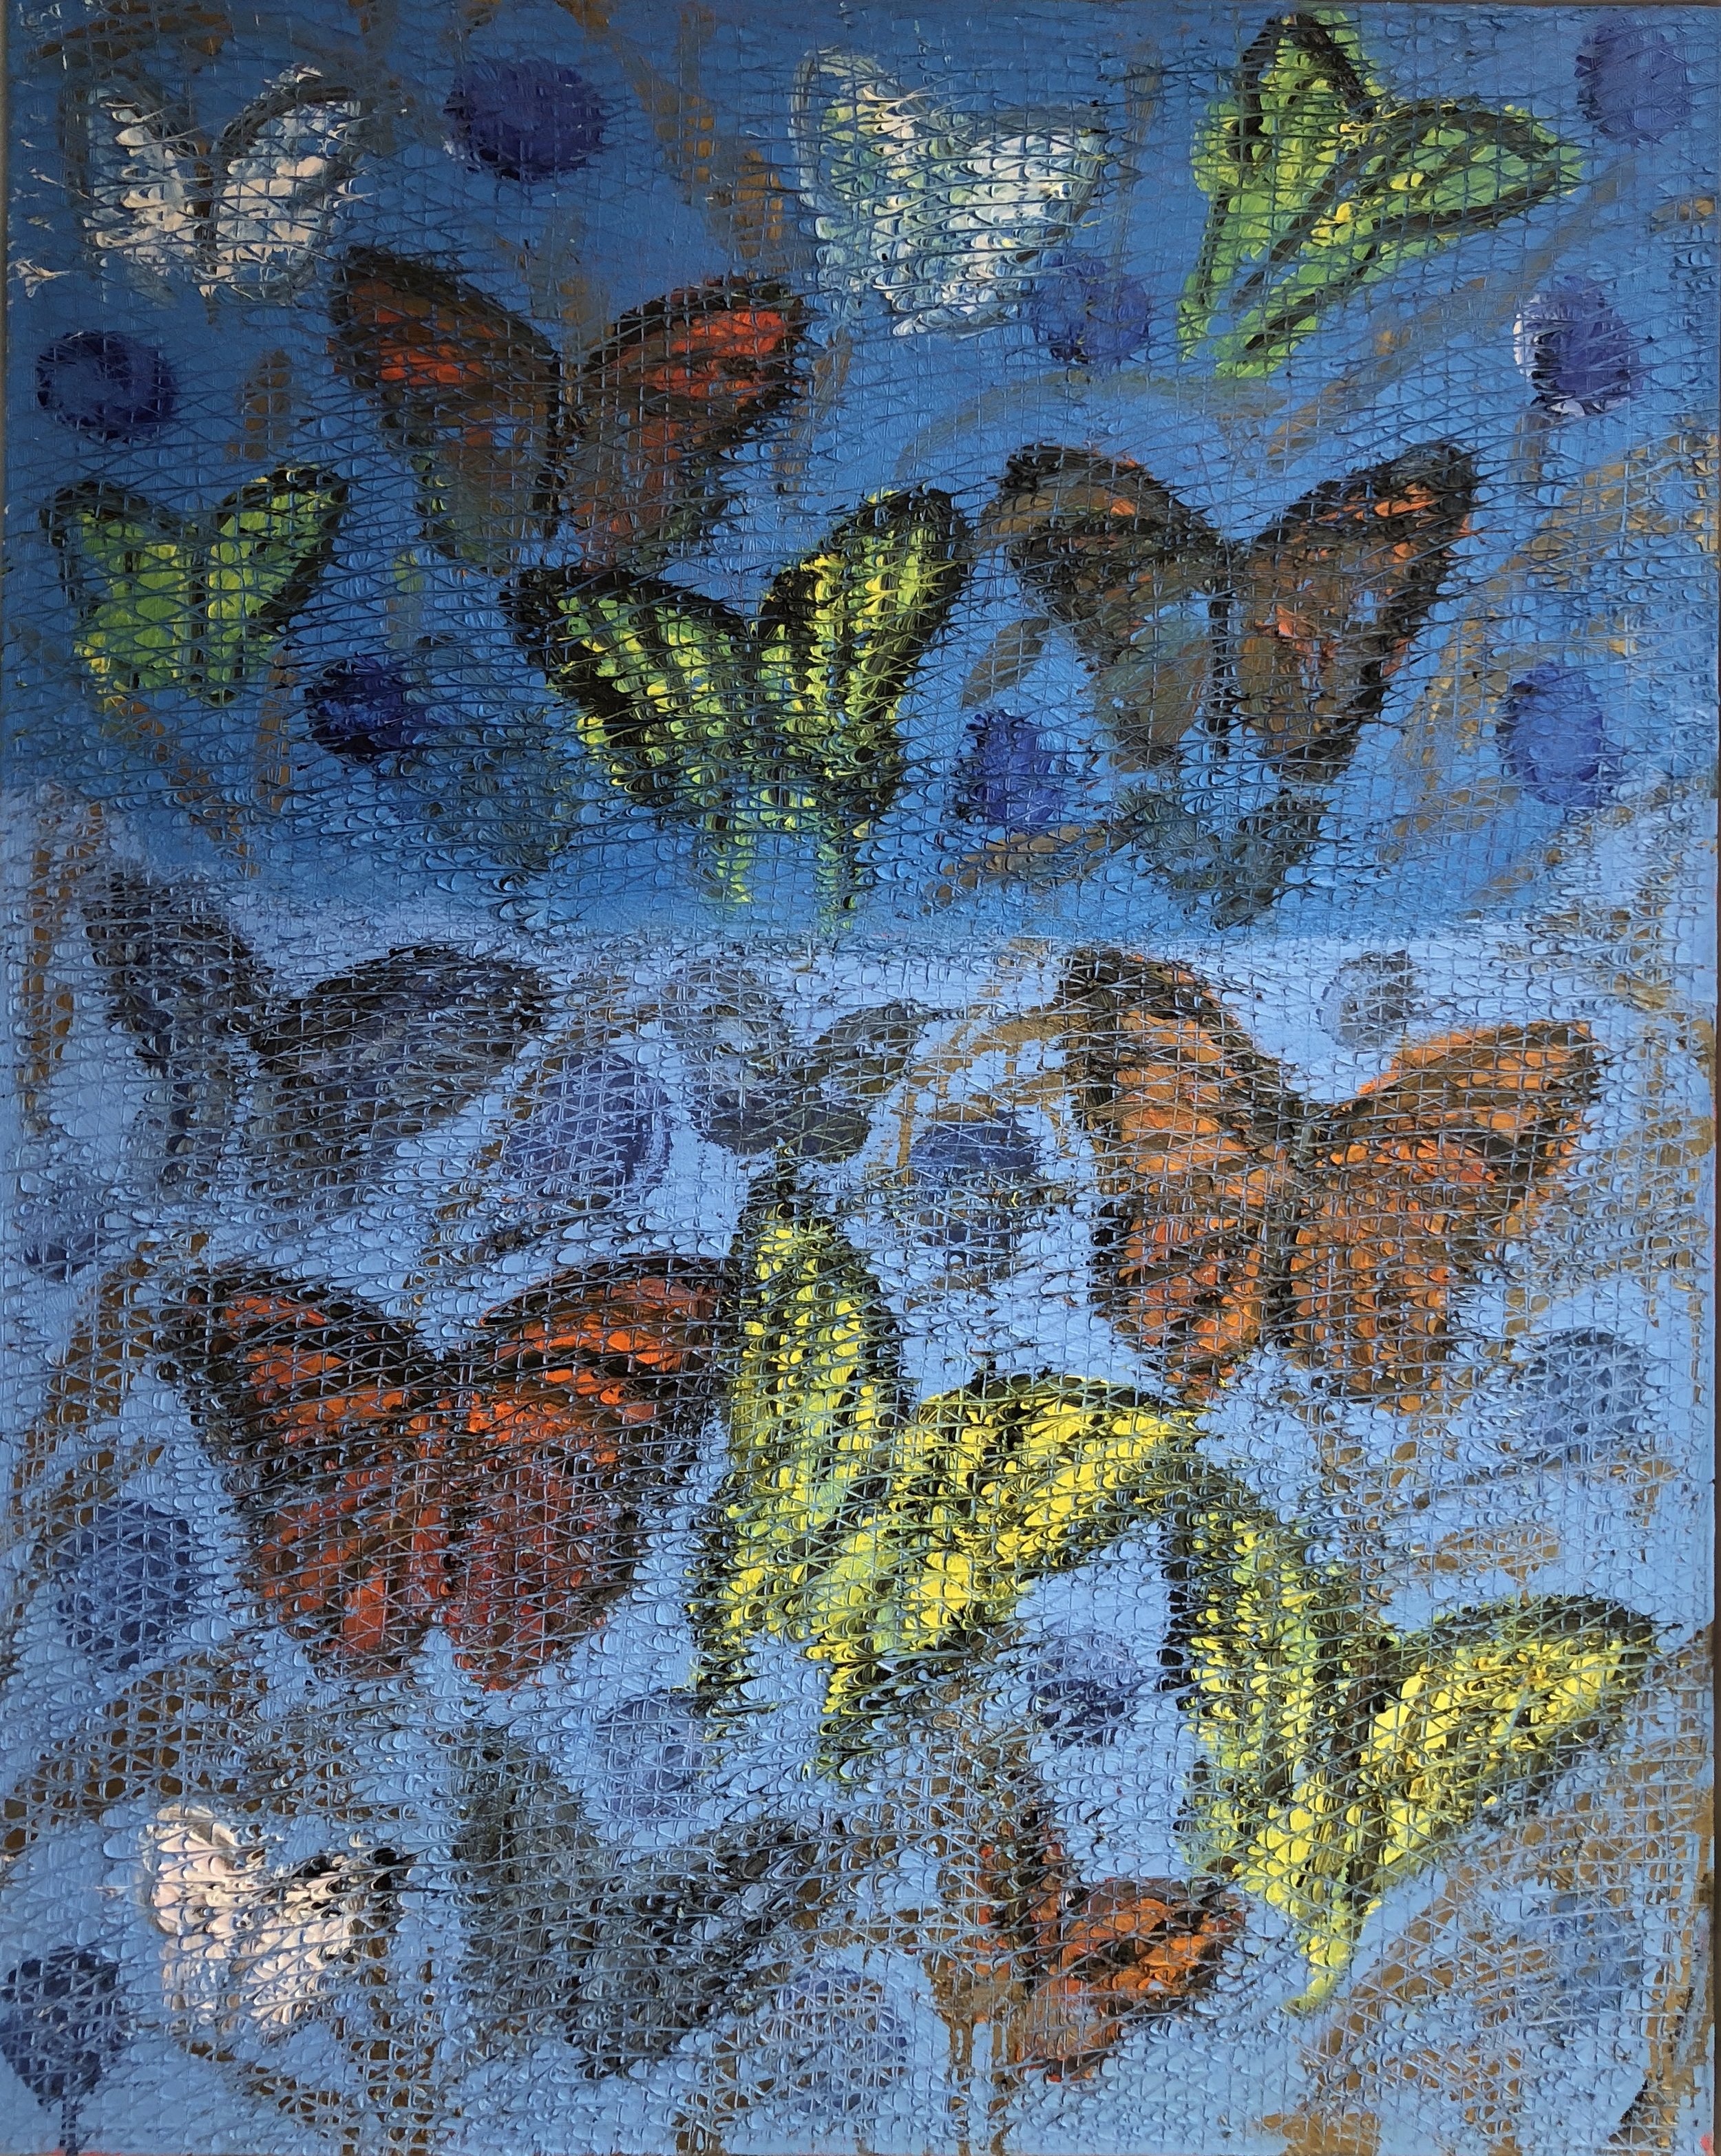  A cascade of butterflies, big and small, near and far.  Their wings range from red, orange, yellow,  black and white, all on a a background where the top half is sky blue and the bottom half is baby blue. 